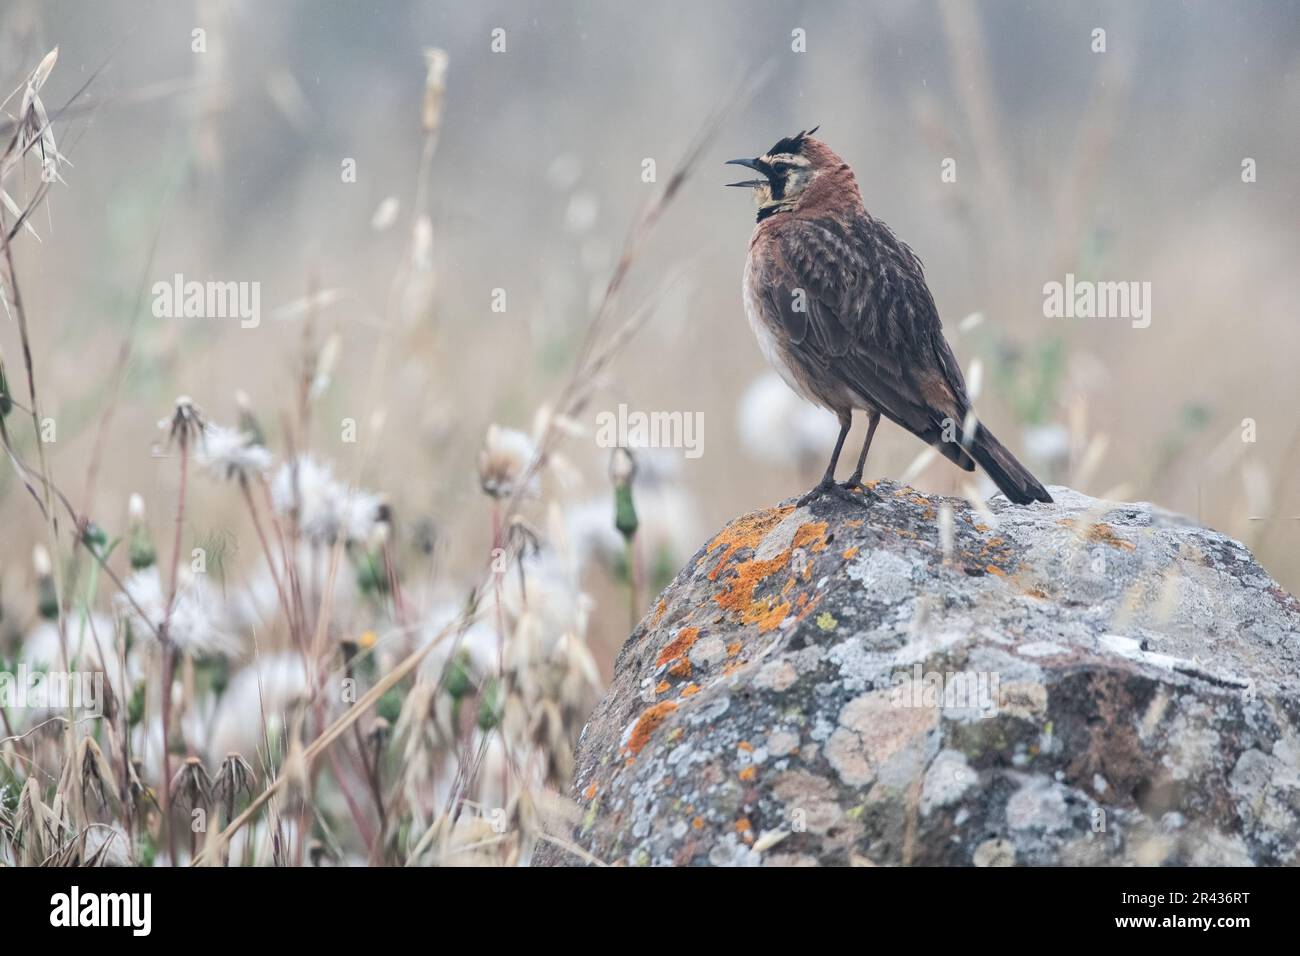 The island horned lark, Eremophila alpestris insularis, a subspecies of bird endemic to Channel islands National Park in California, USA. Stock Photo